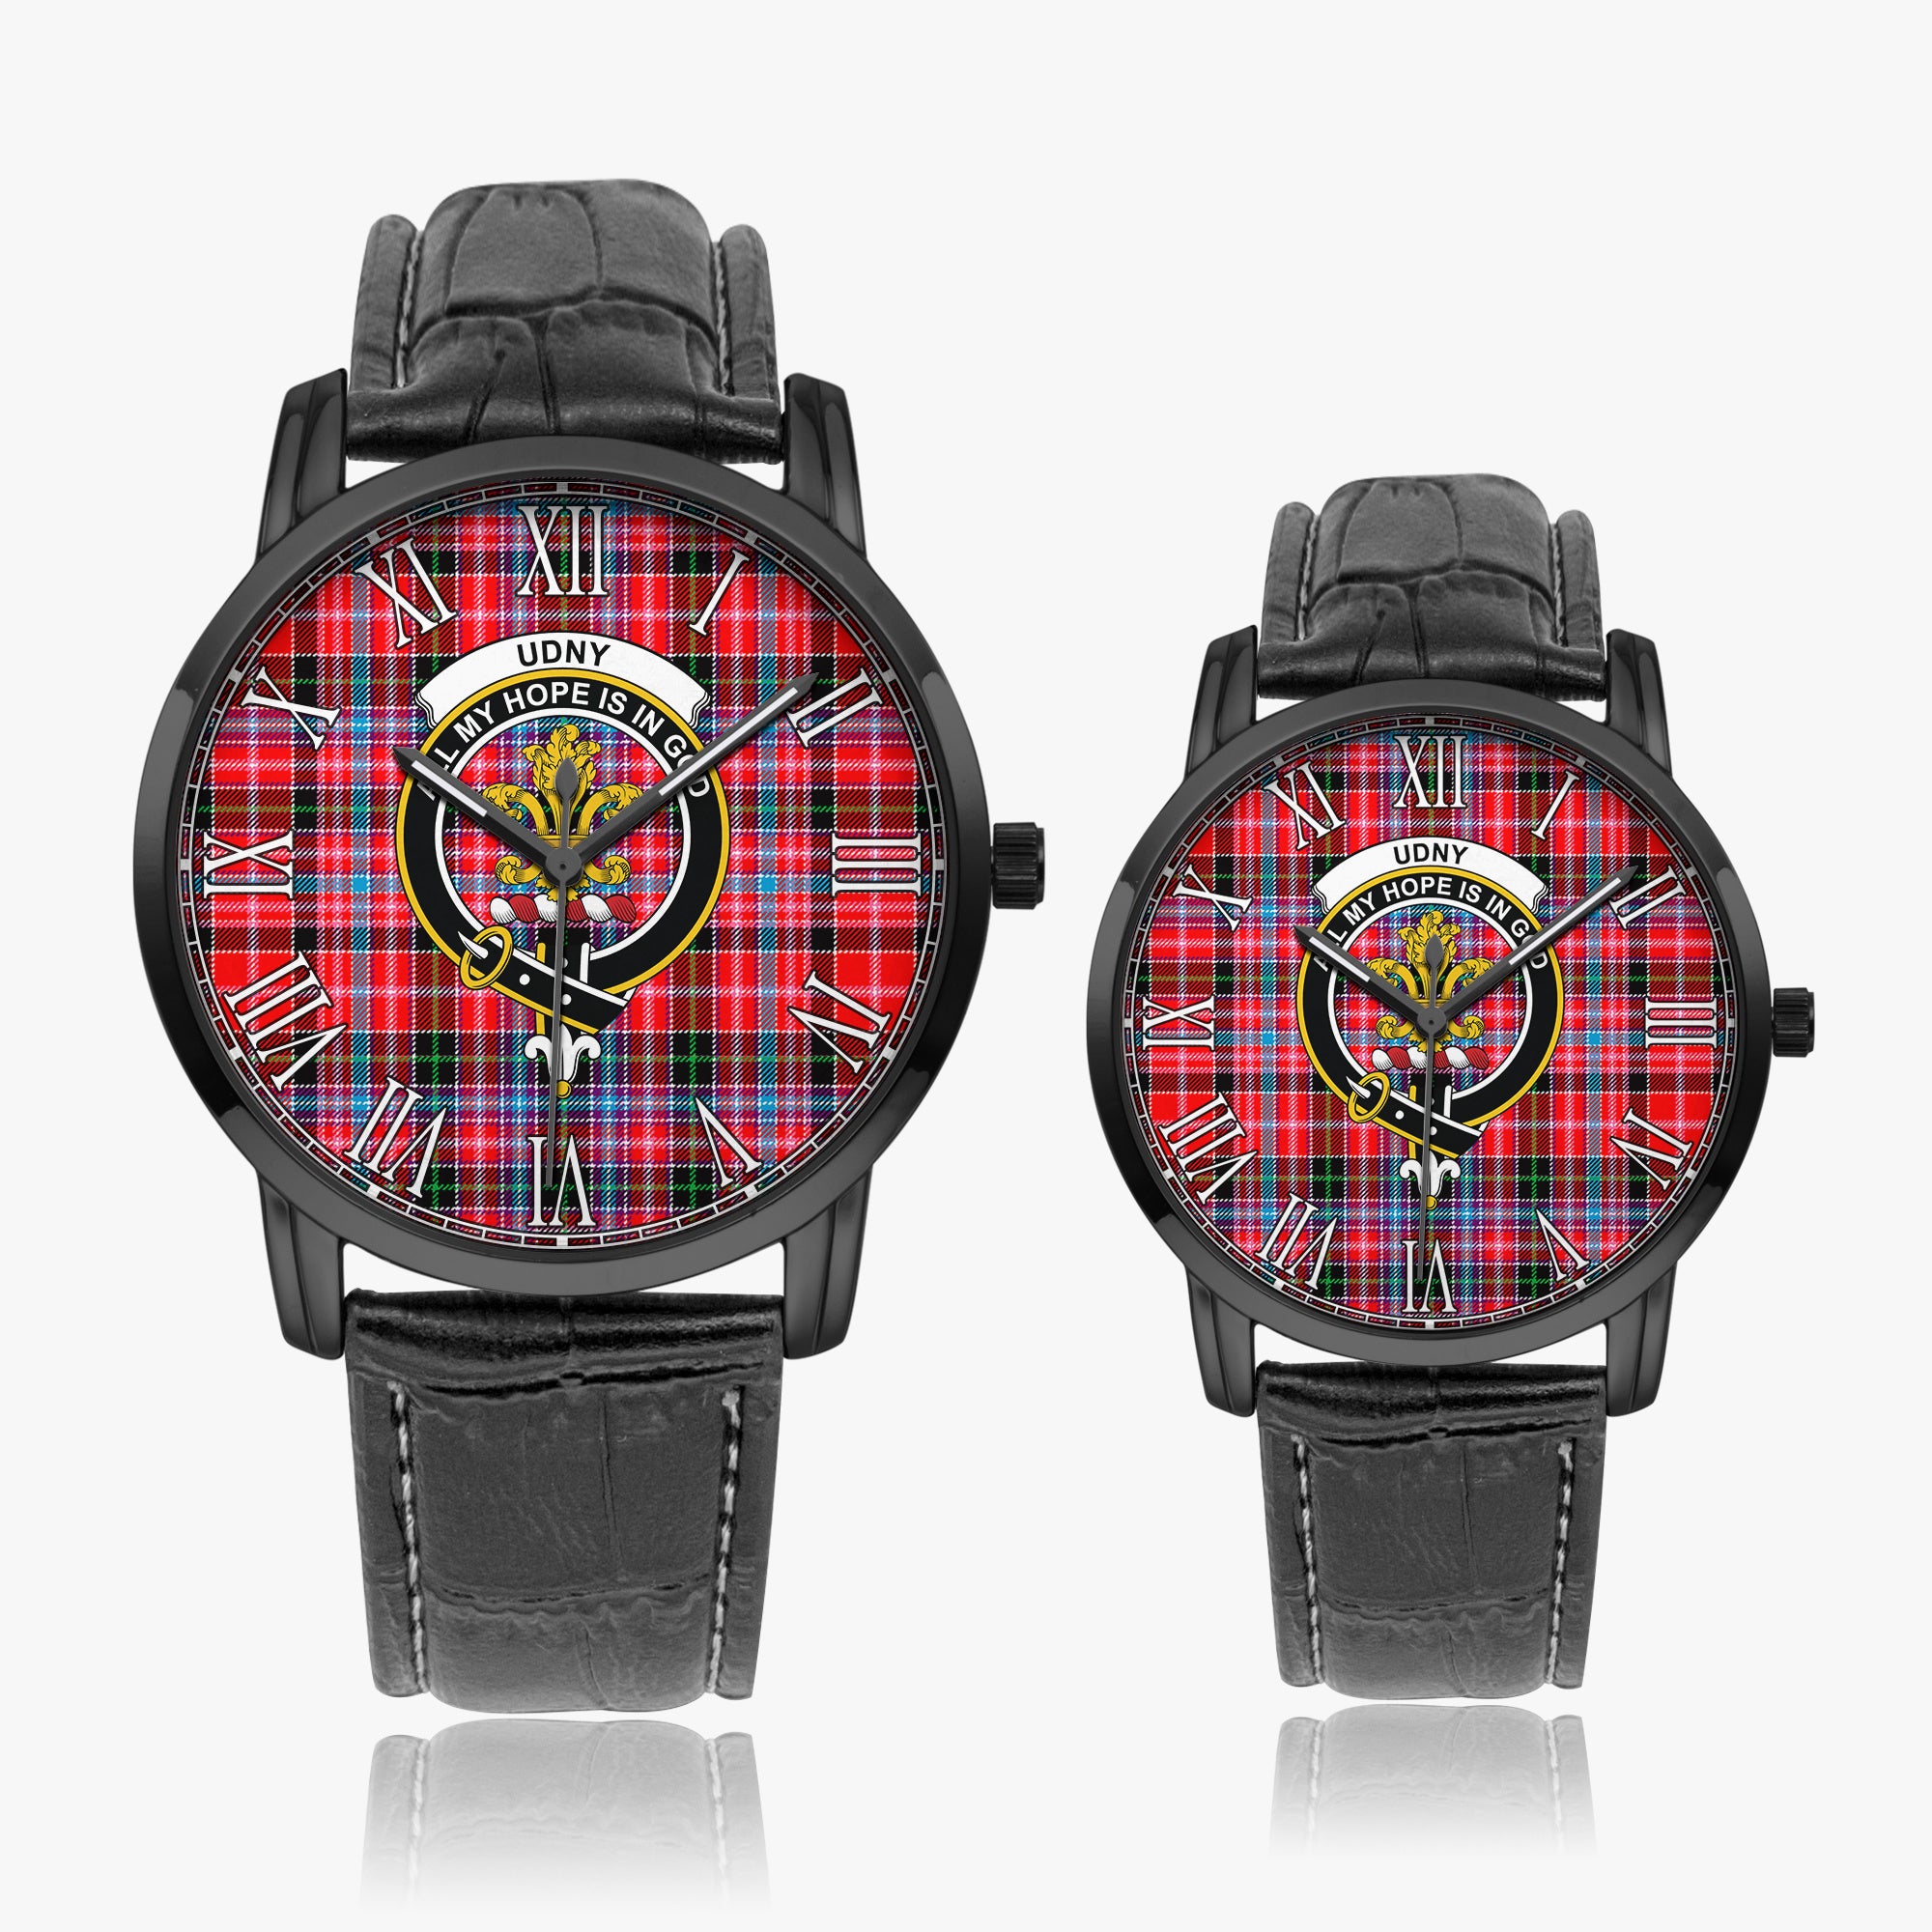 udny-family-crest-quartz-watch-with-leather-strap-tartan-instafamous-quartz-leather-strap-watch